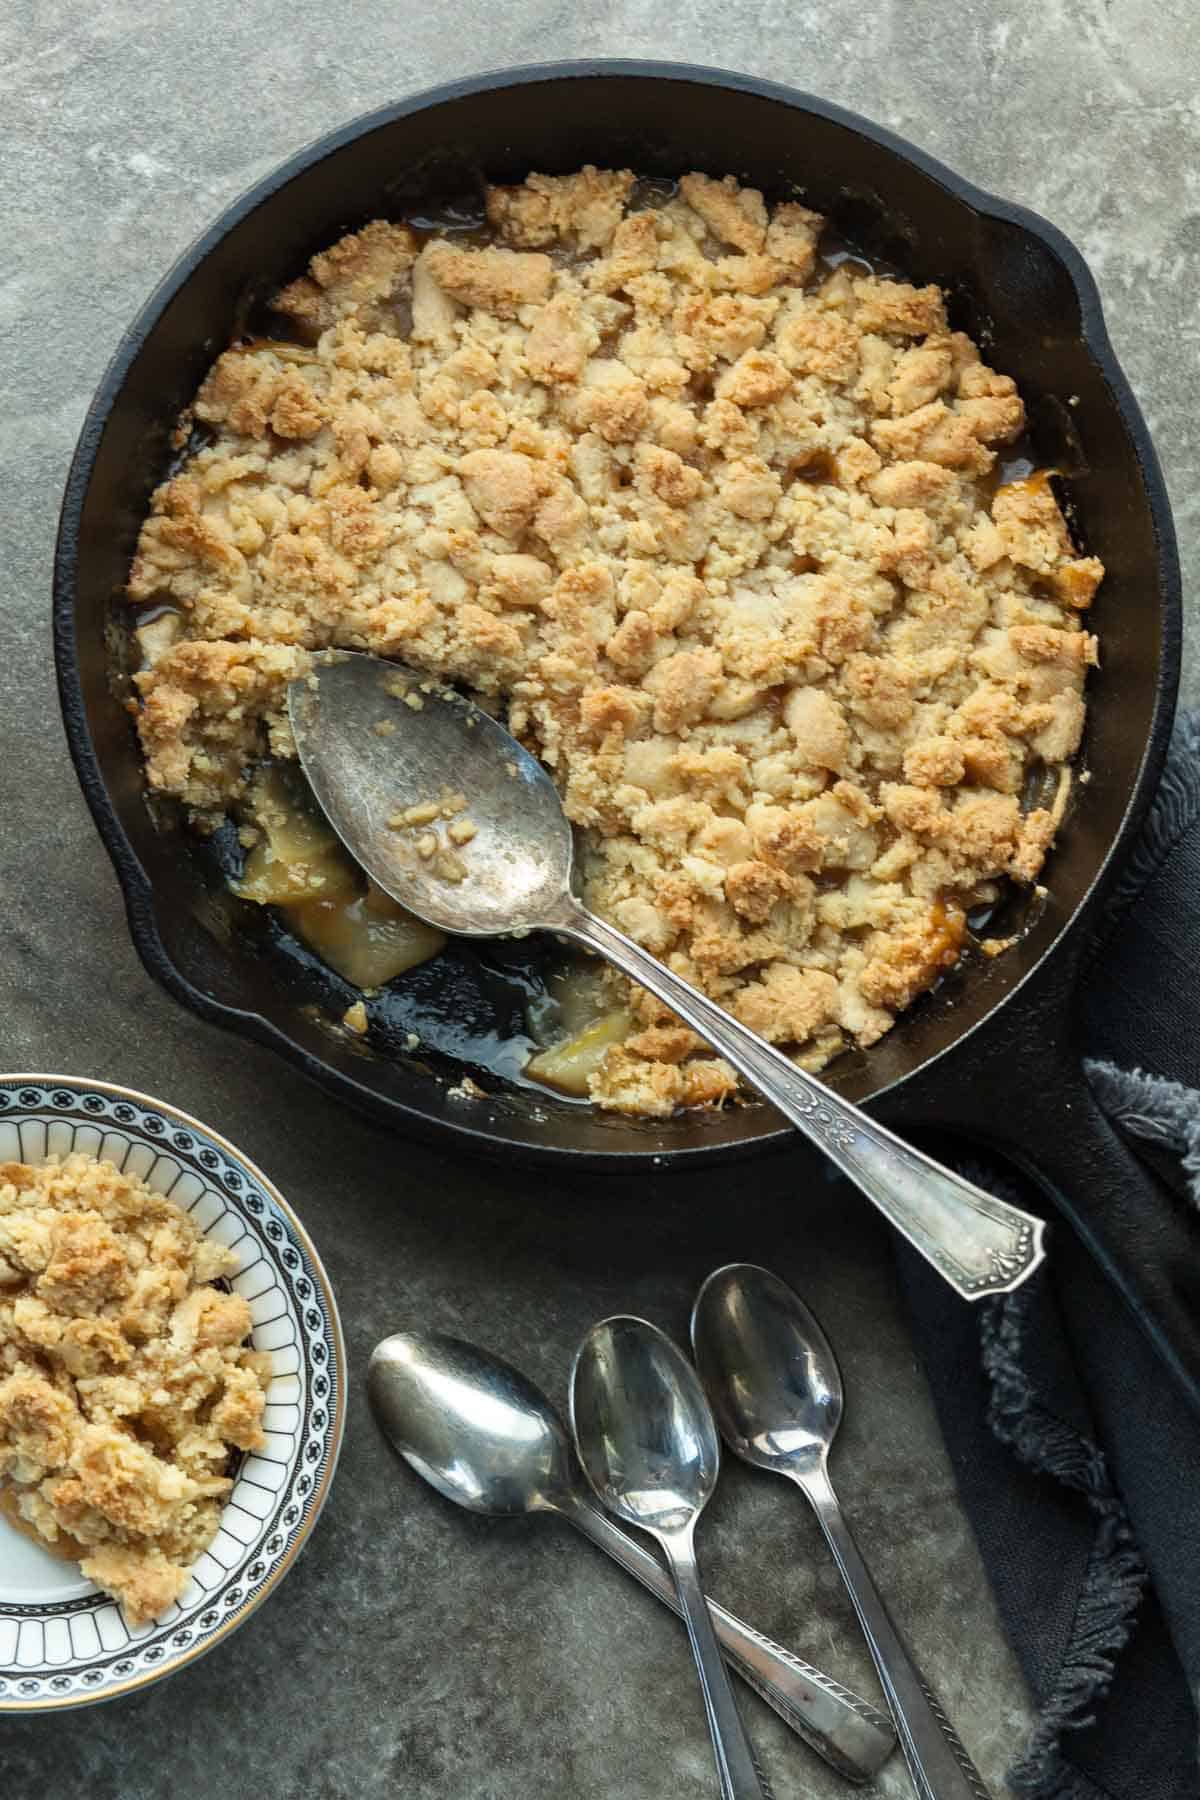 Gluten-Free Apple Crumble in Skillet with Spoon